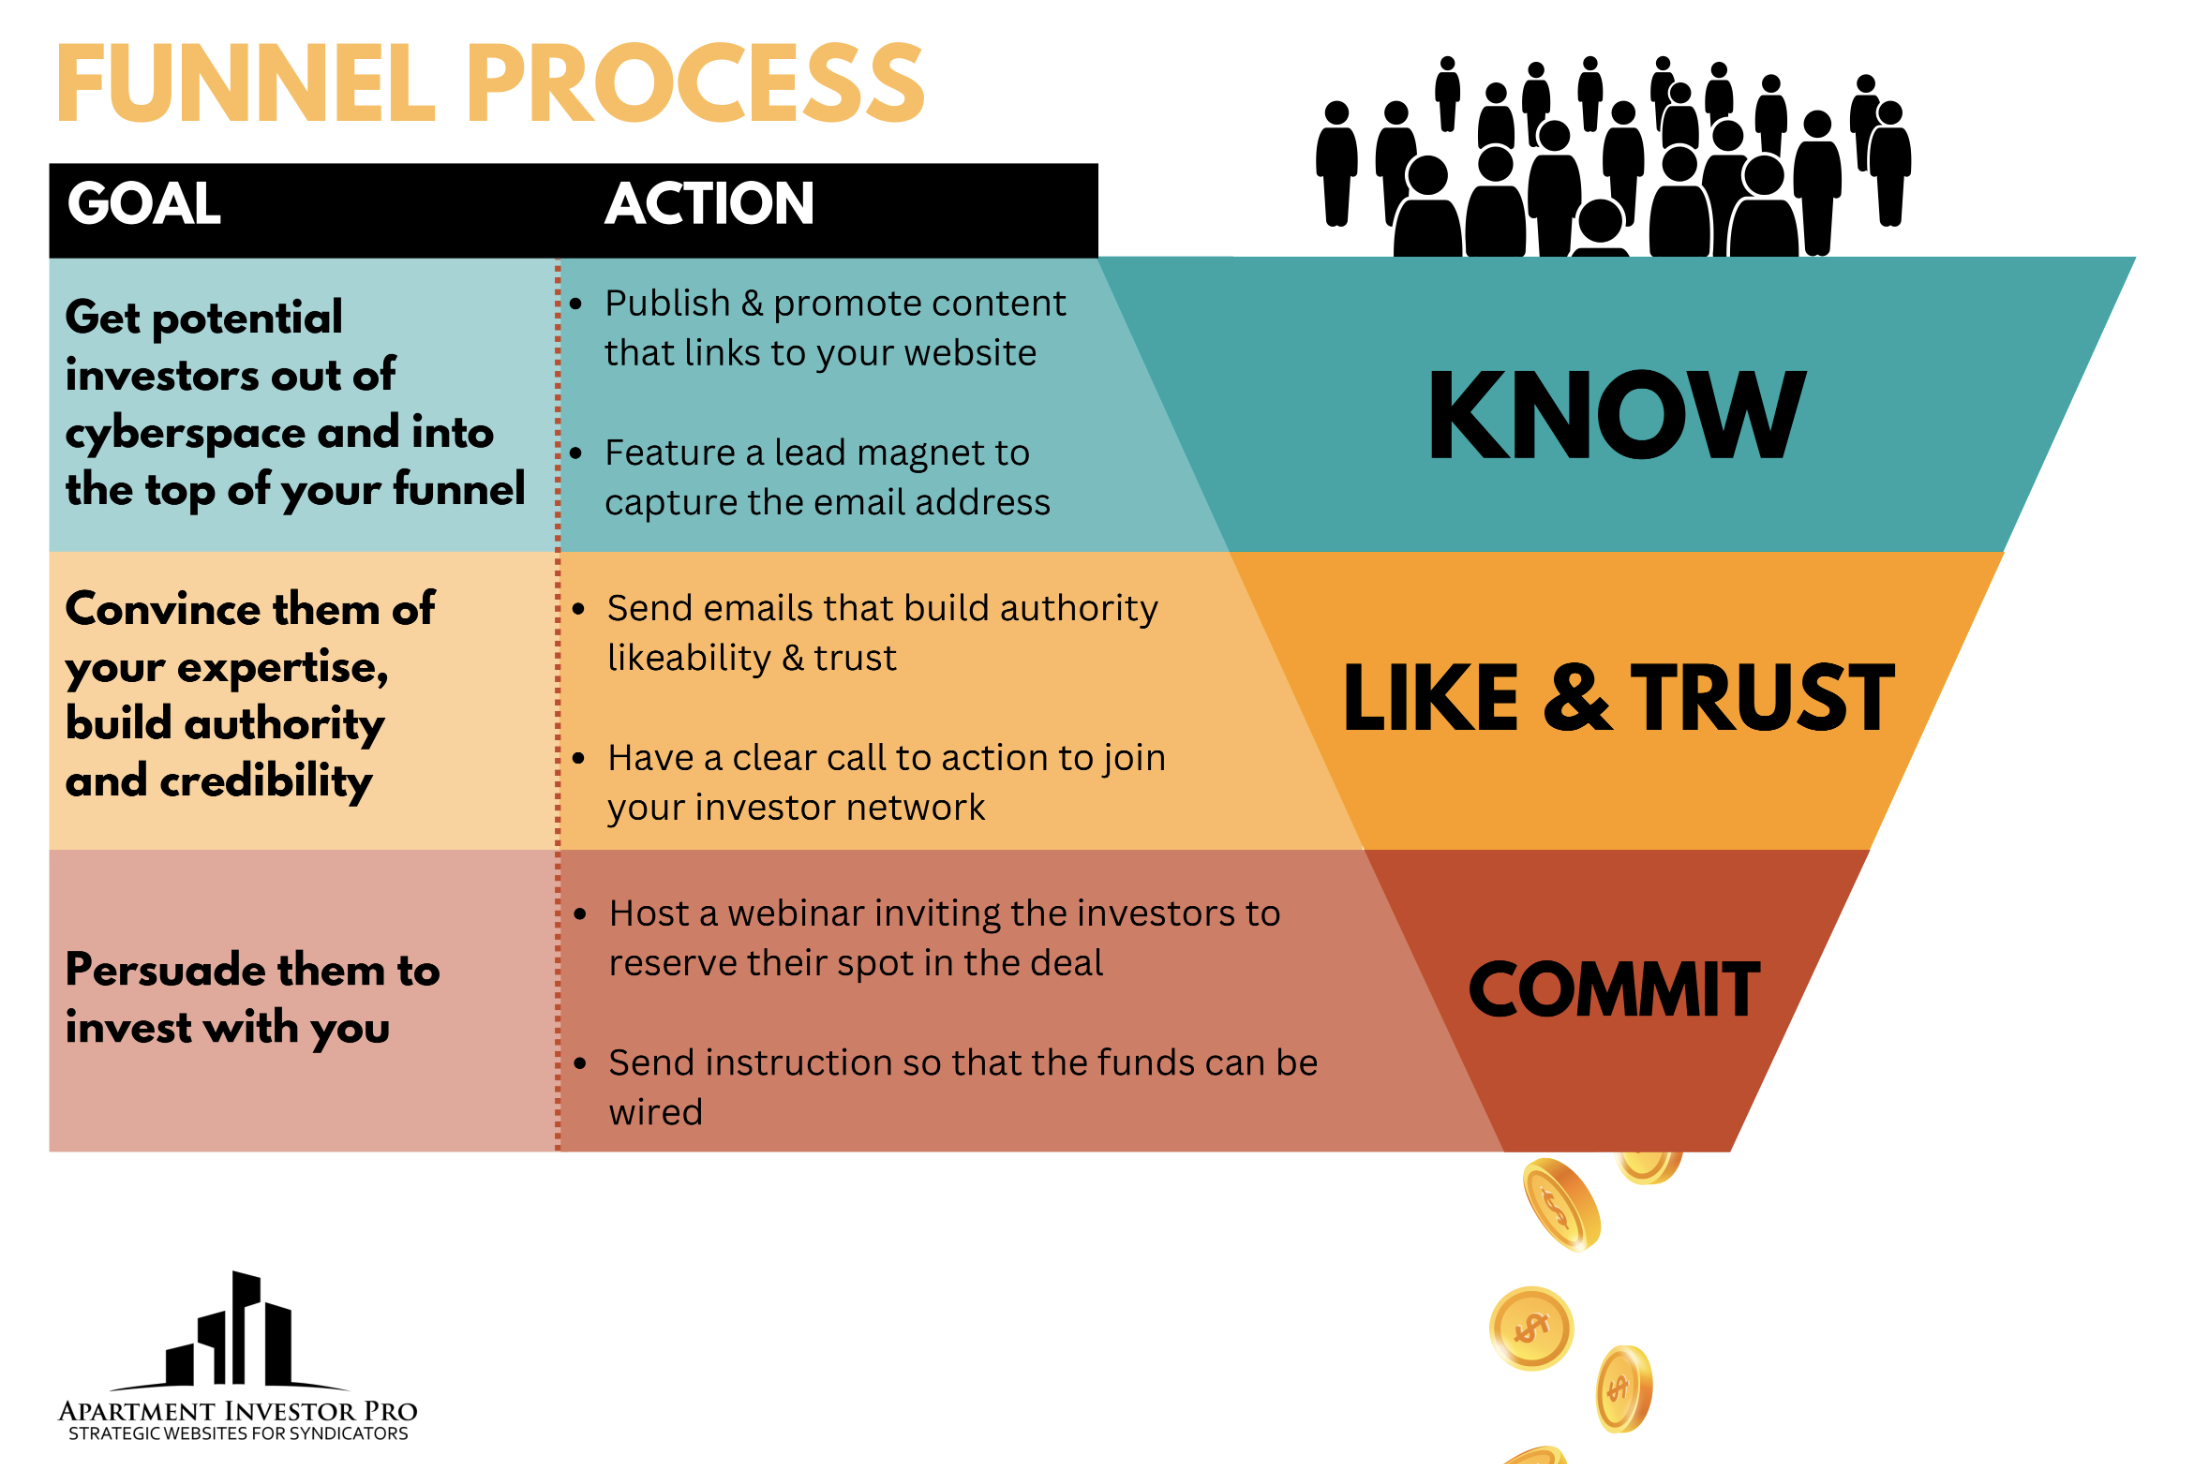 Marketing Funnel Infographic